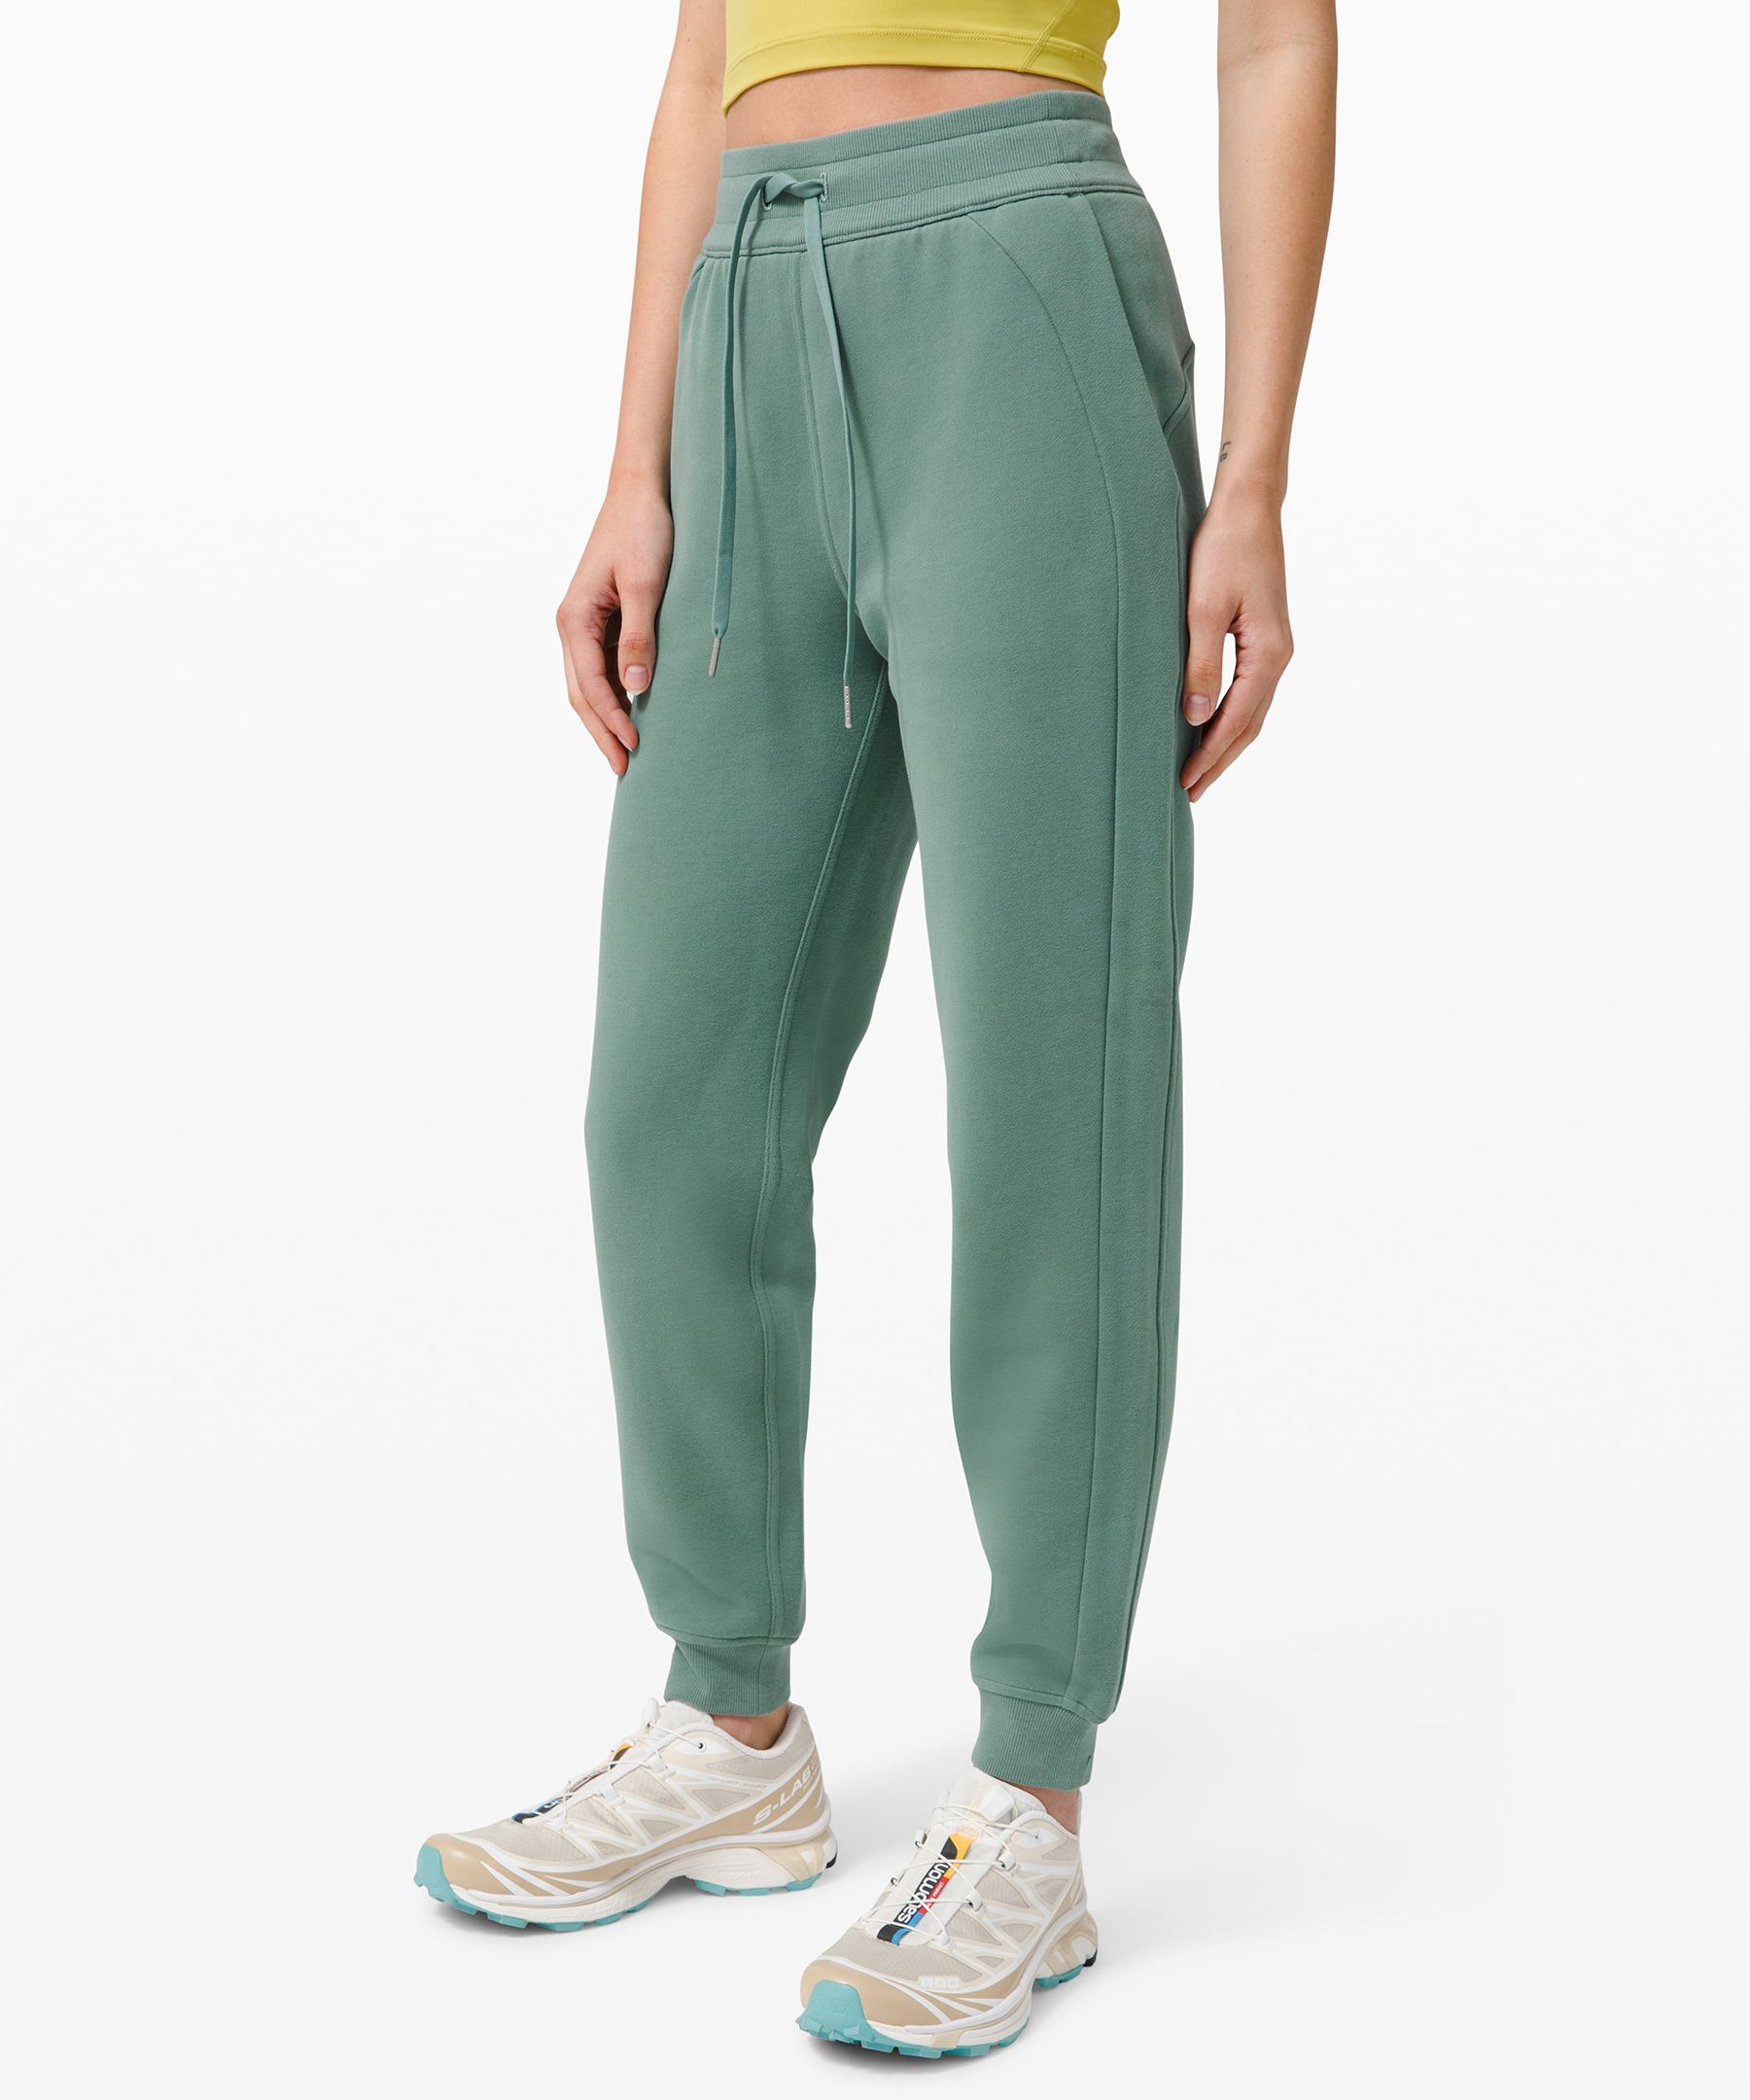 so smitten with the stretch hi-rise joggers 😍 trench is such a